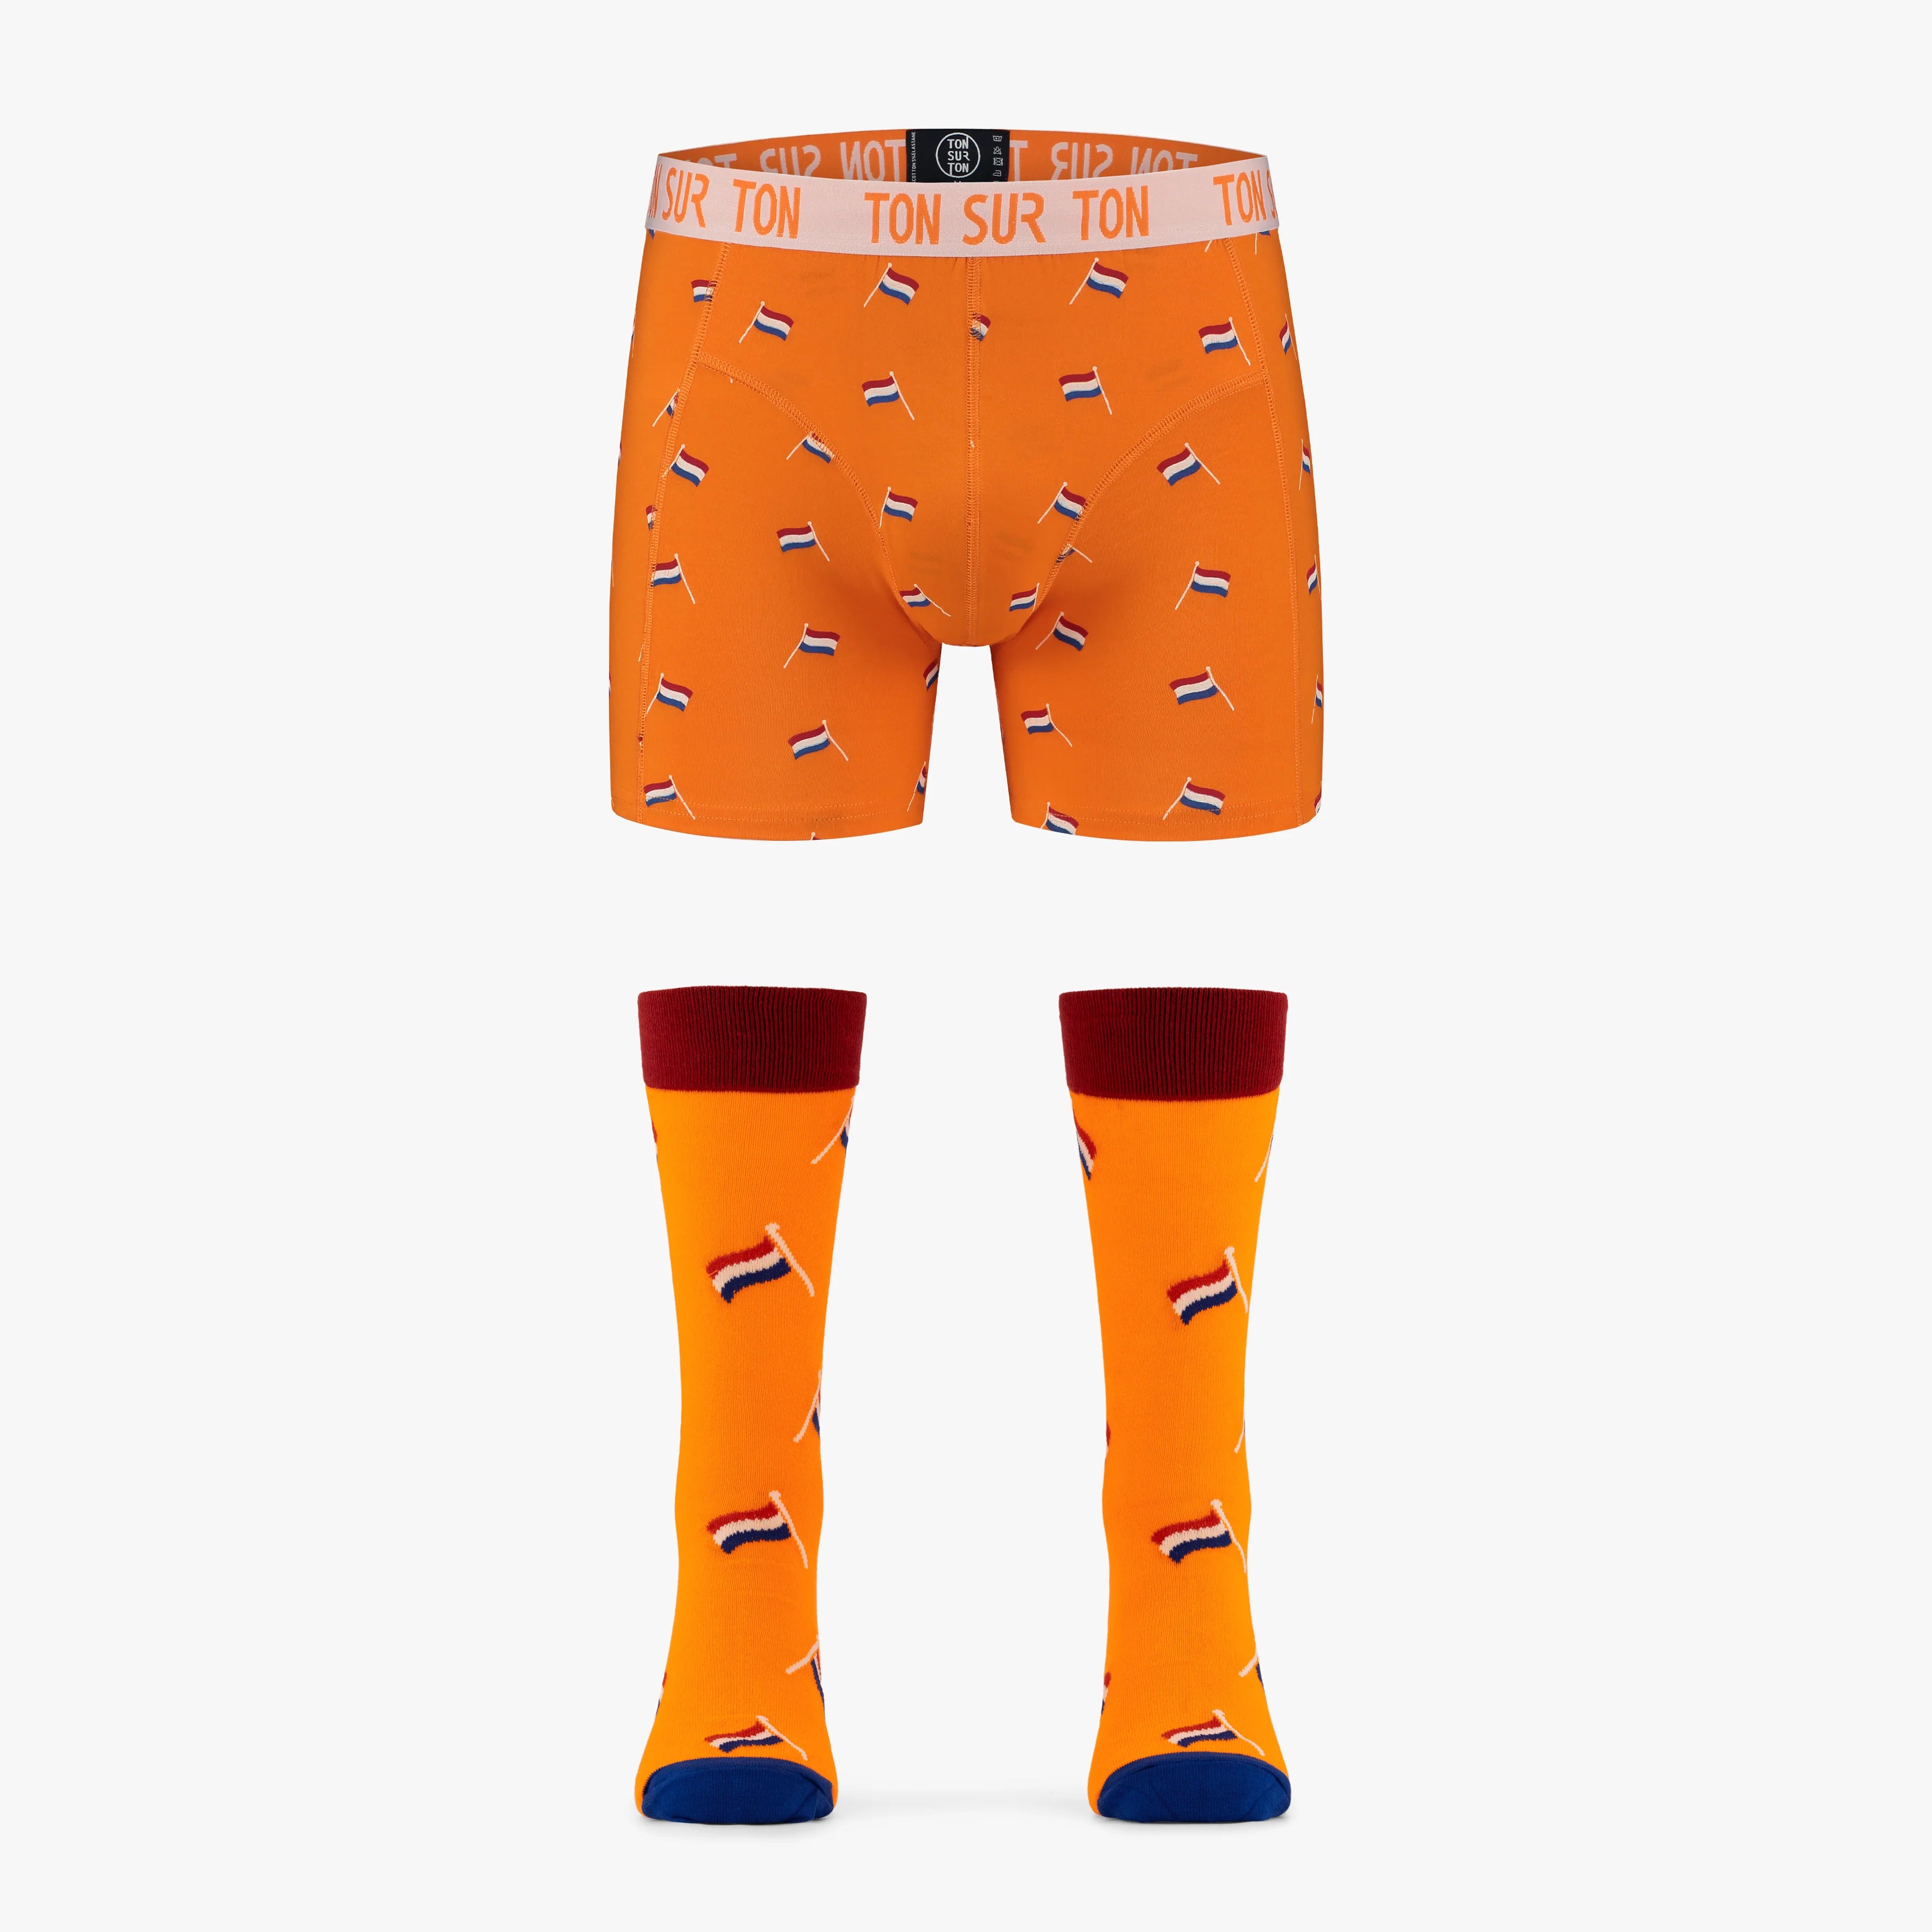 Willem - Organic Cotton Boxer Brief and Socks